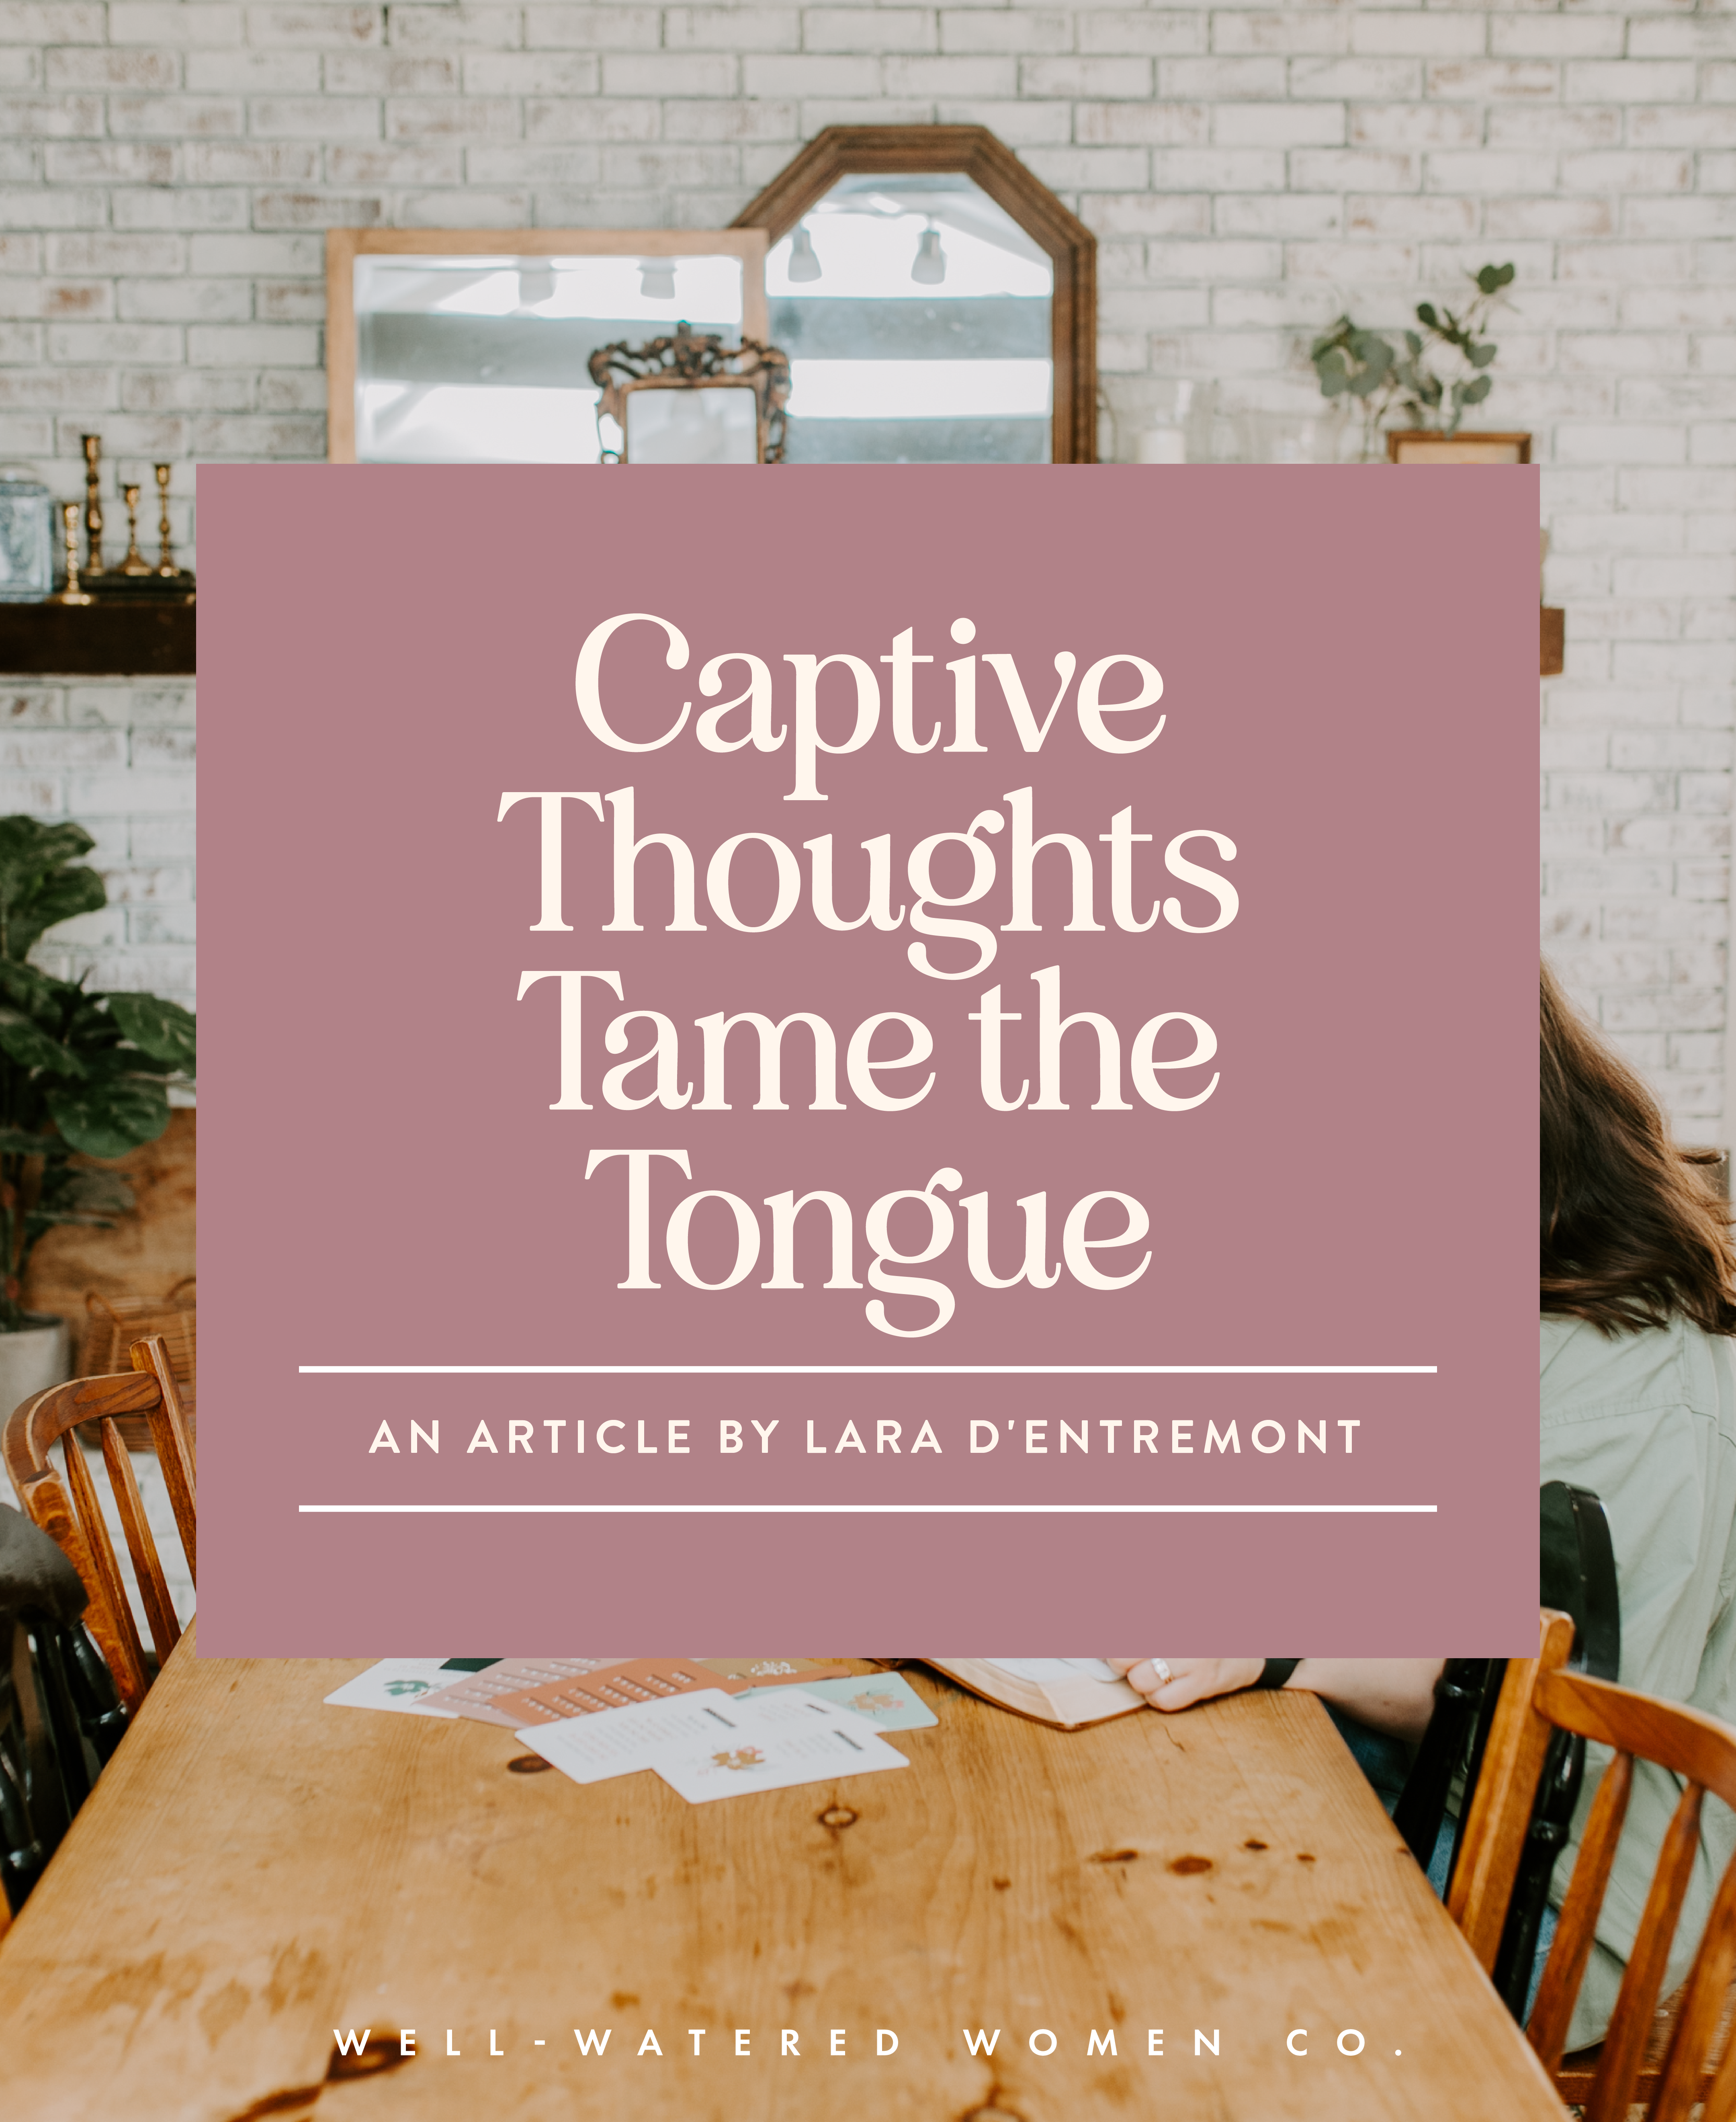 Captive Thoughts Tame the Tongue - an article from Well-Watered Women